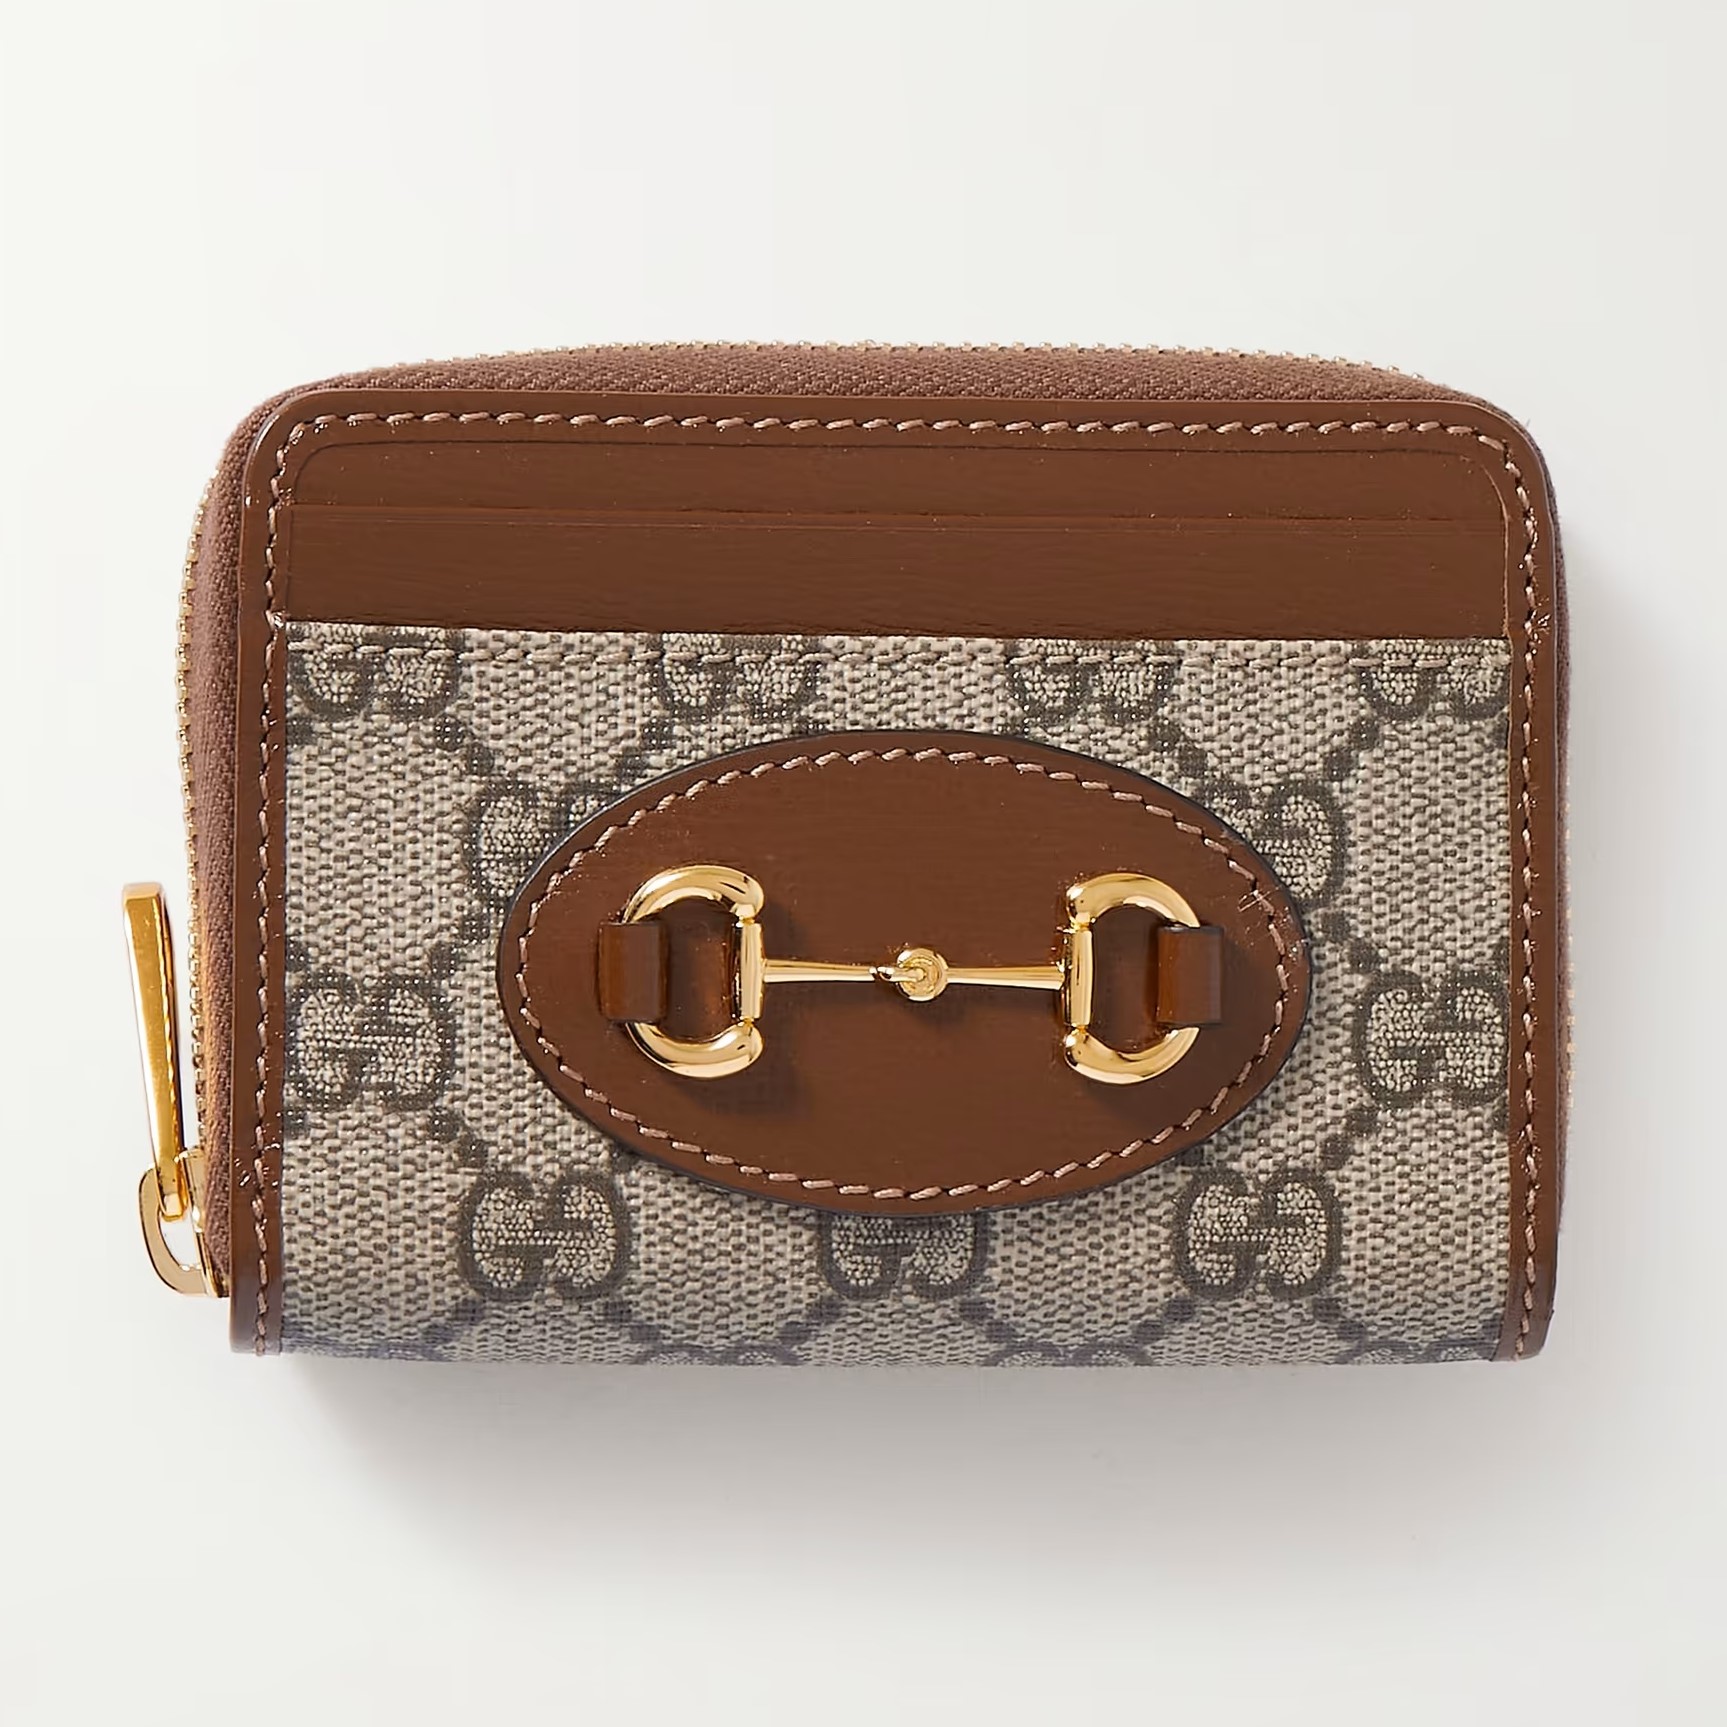 Ví ngắn nữ Gucci Horsebit 1955 Small Brown Leather Trimmed Printed Coated  Canvas Cardholder